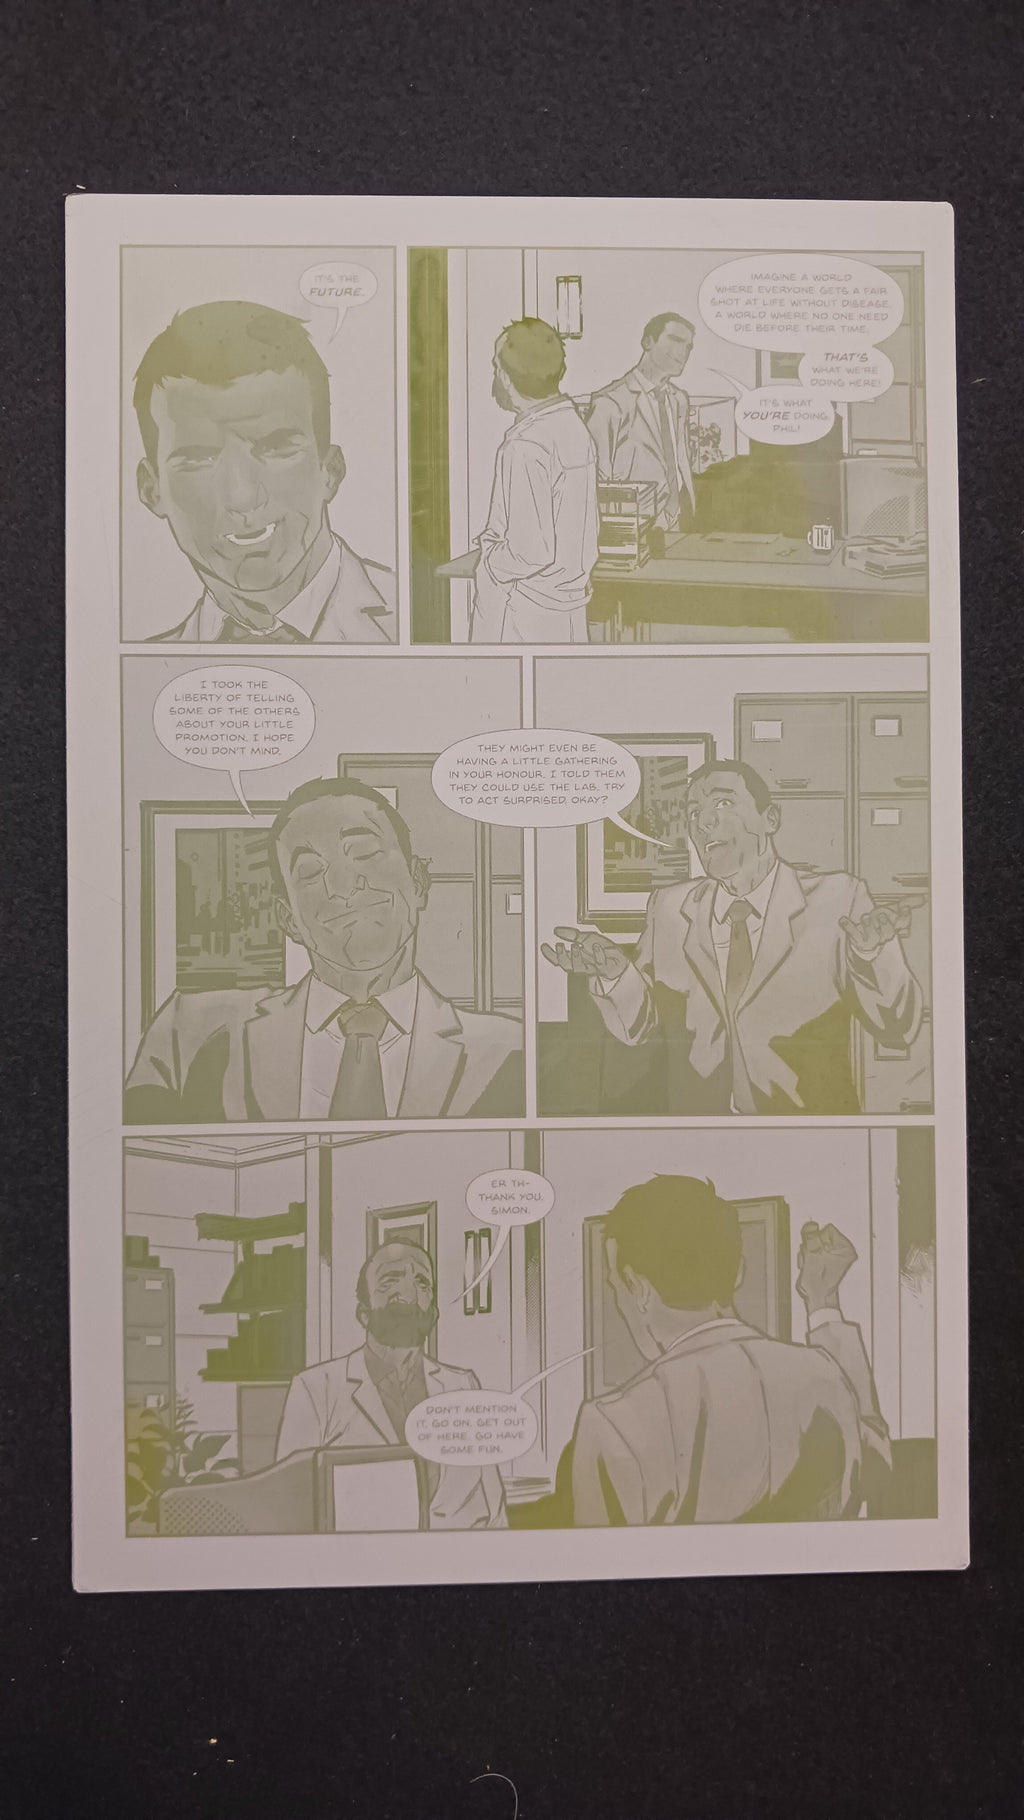 Category Zero Conflict #4 - Page 2 - PRESSWORKS - Comic Art - Printer Plate - Yellow